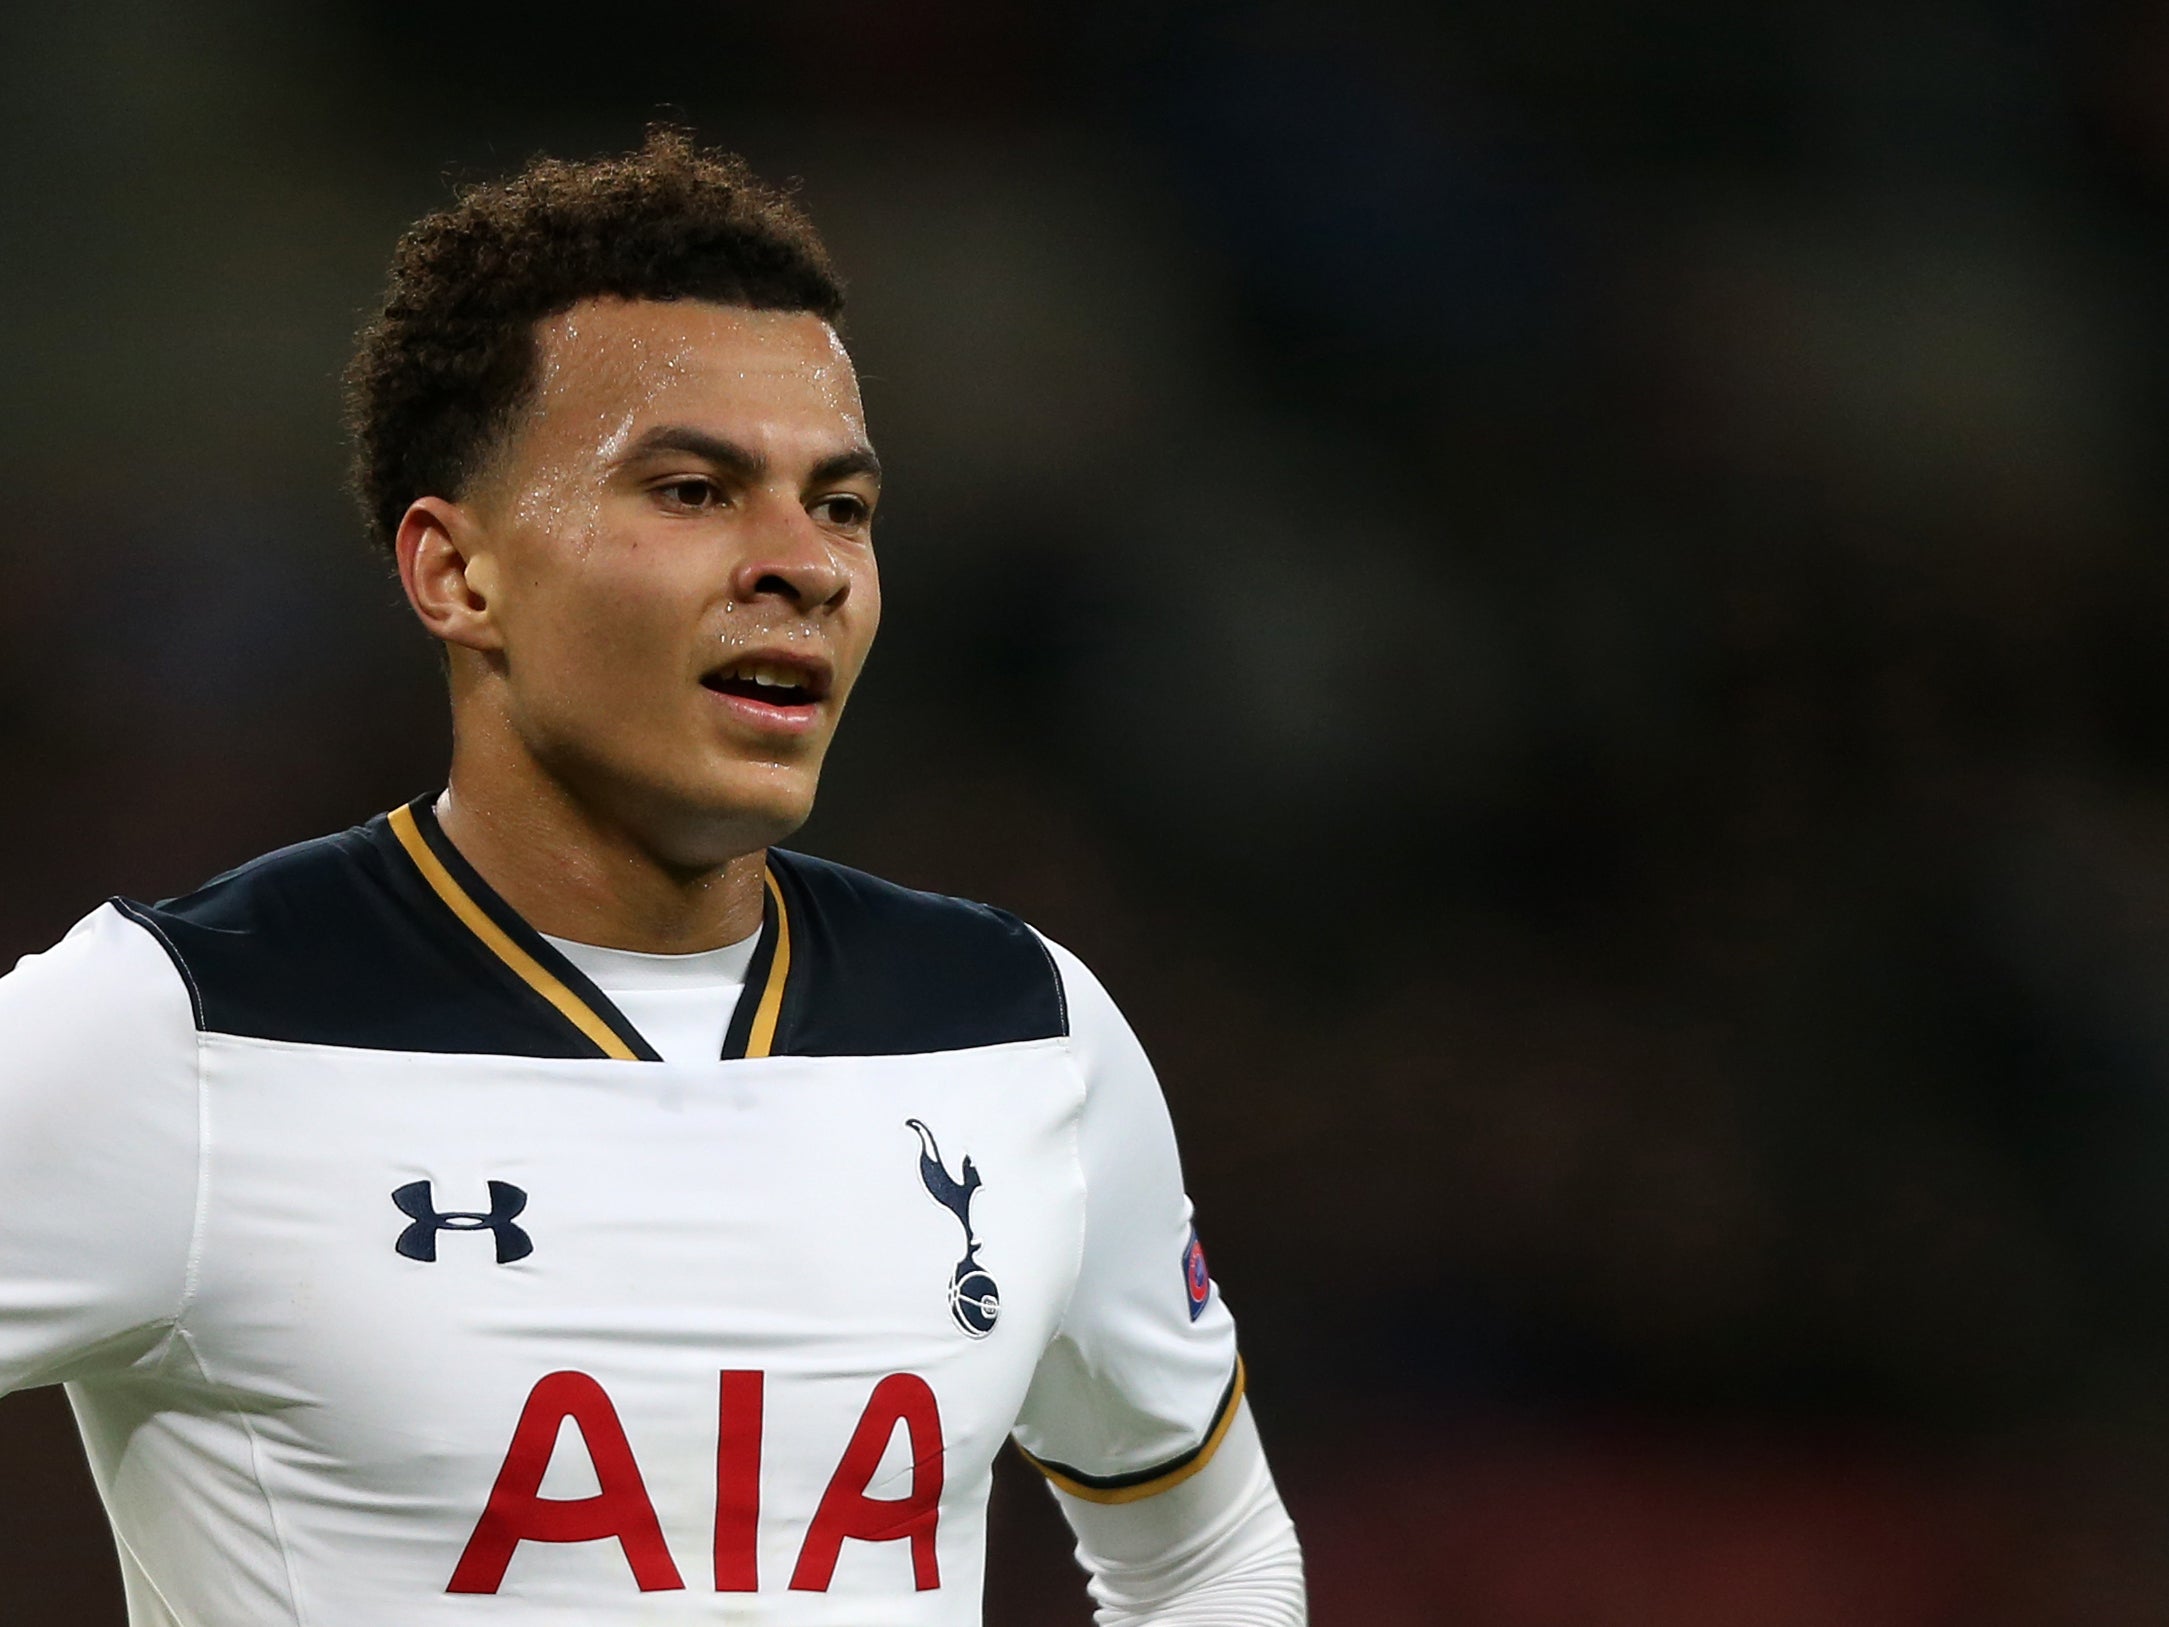 Alli was heavily criticised in the wake of his horror lunge